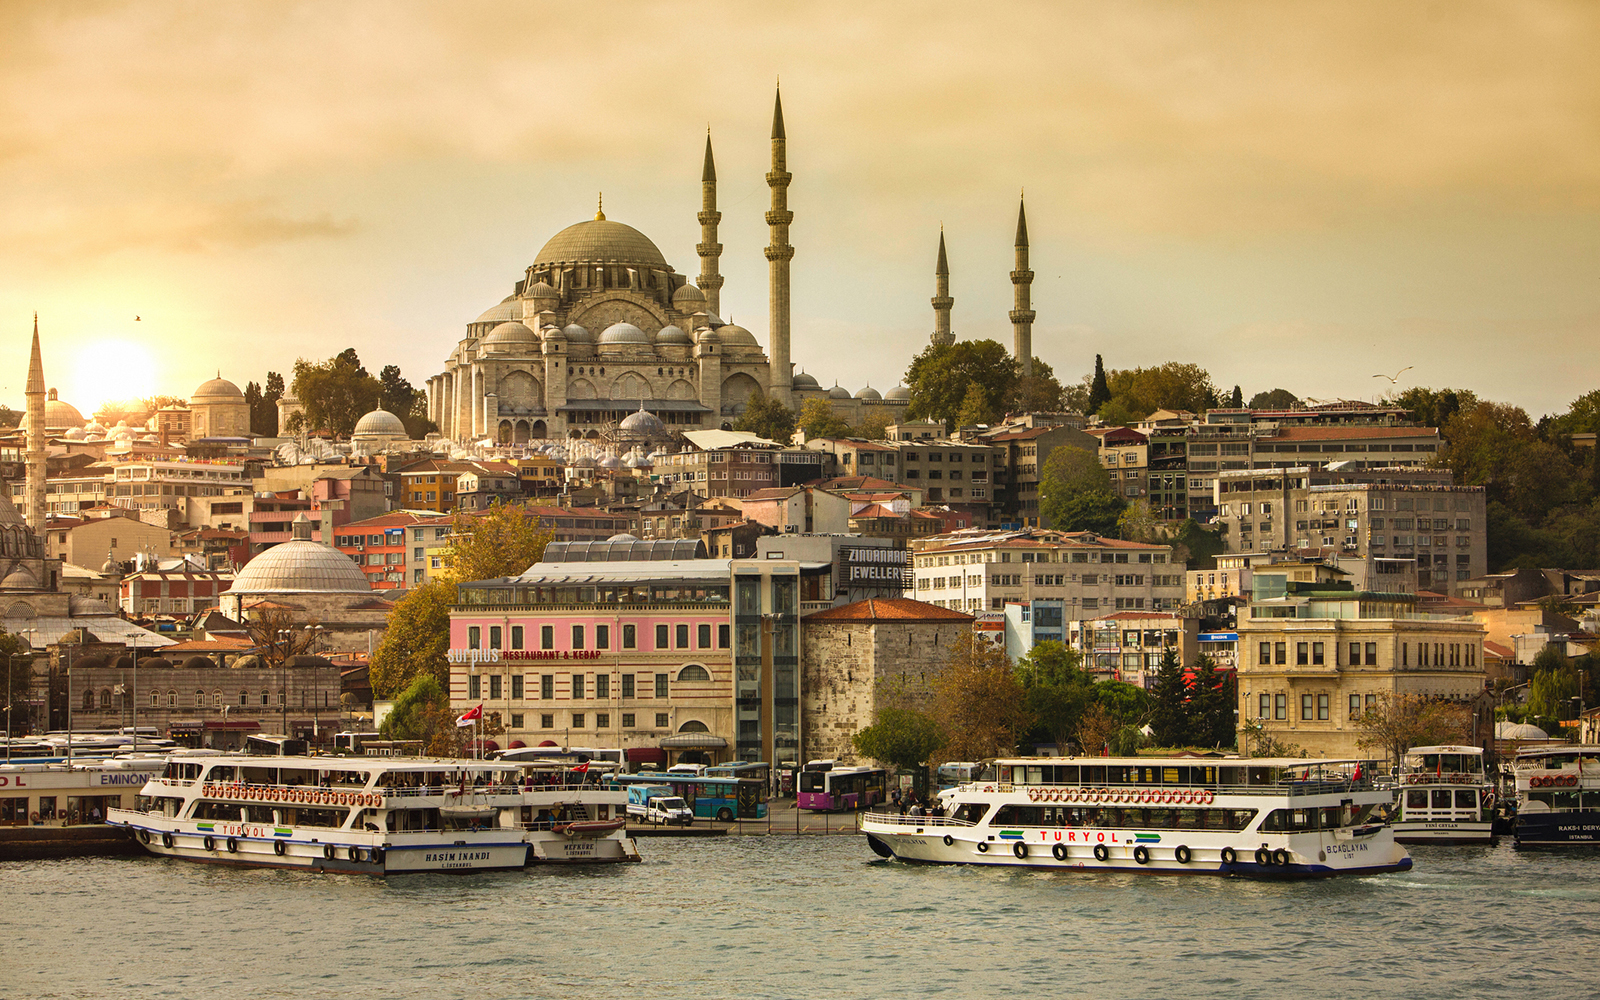 Panorama view of Istanbul at sunset.